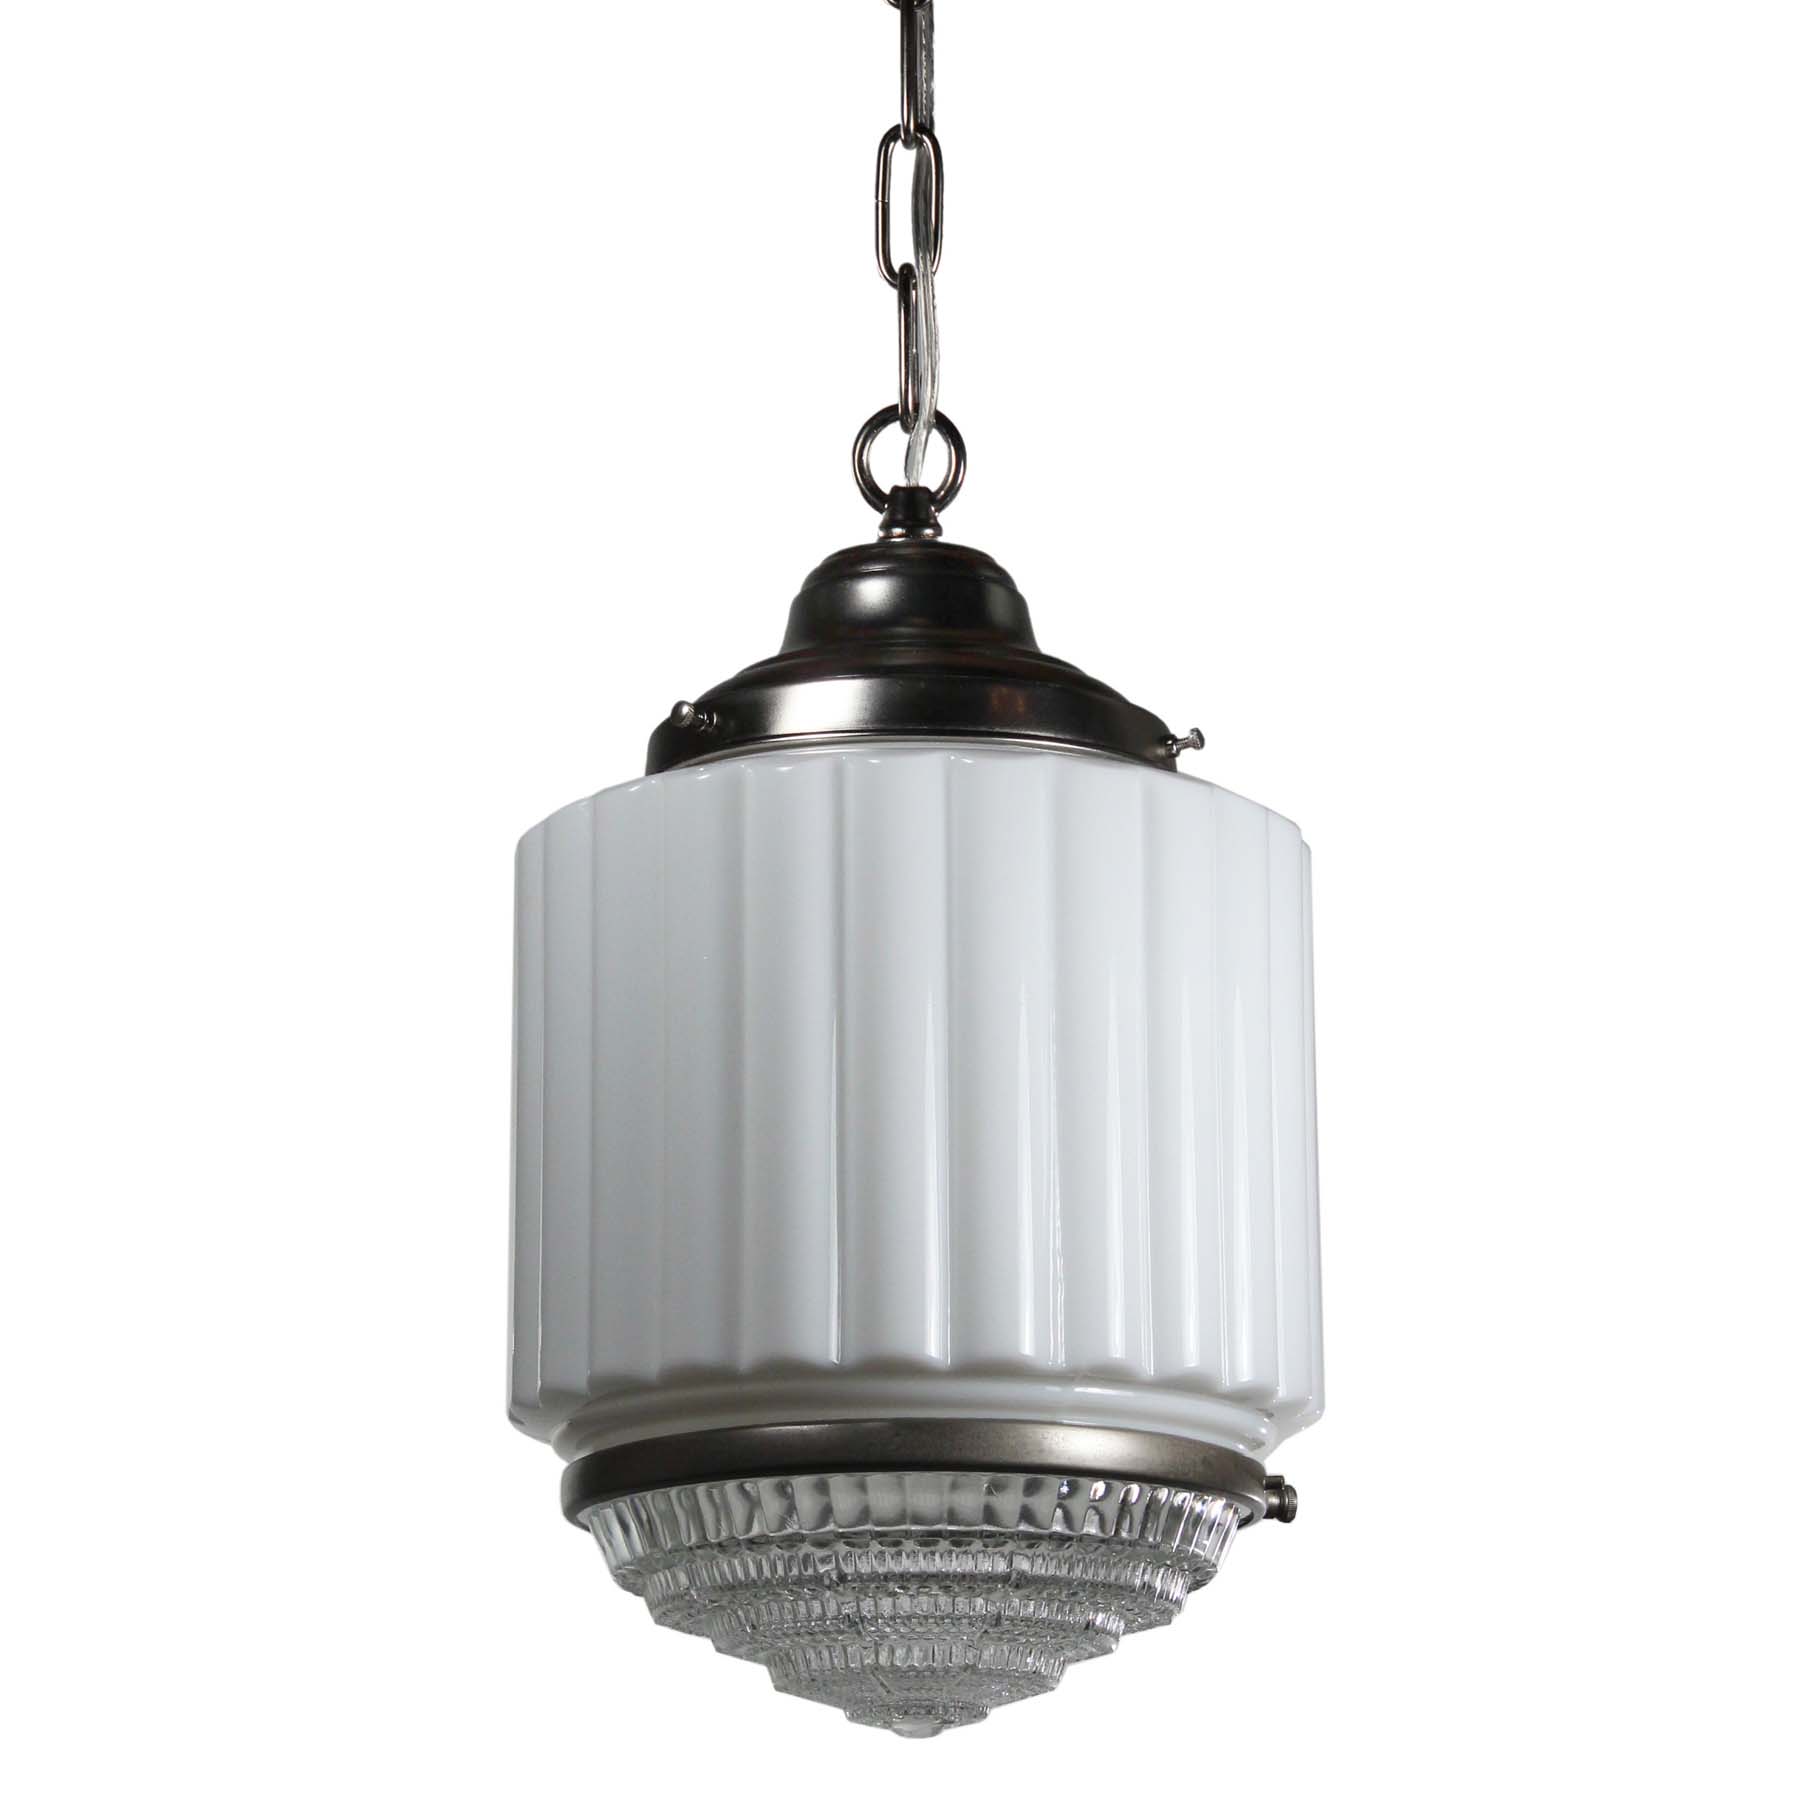 SOLD Art Deco Skyscraper Pendant Light with Two-Part Prismatic Shade, Antique Lighting-0